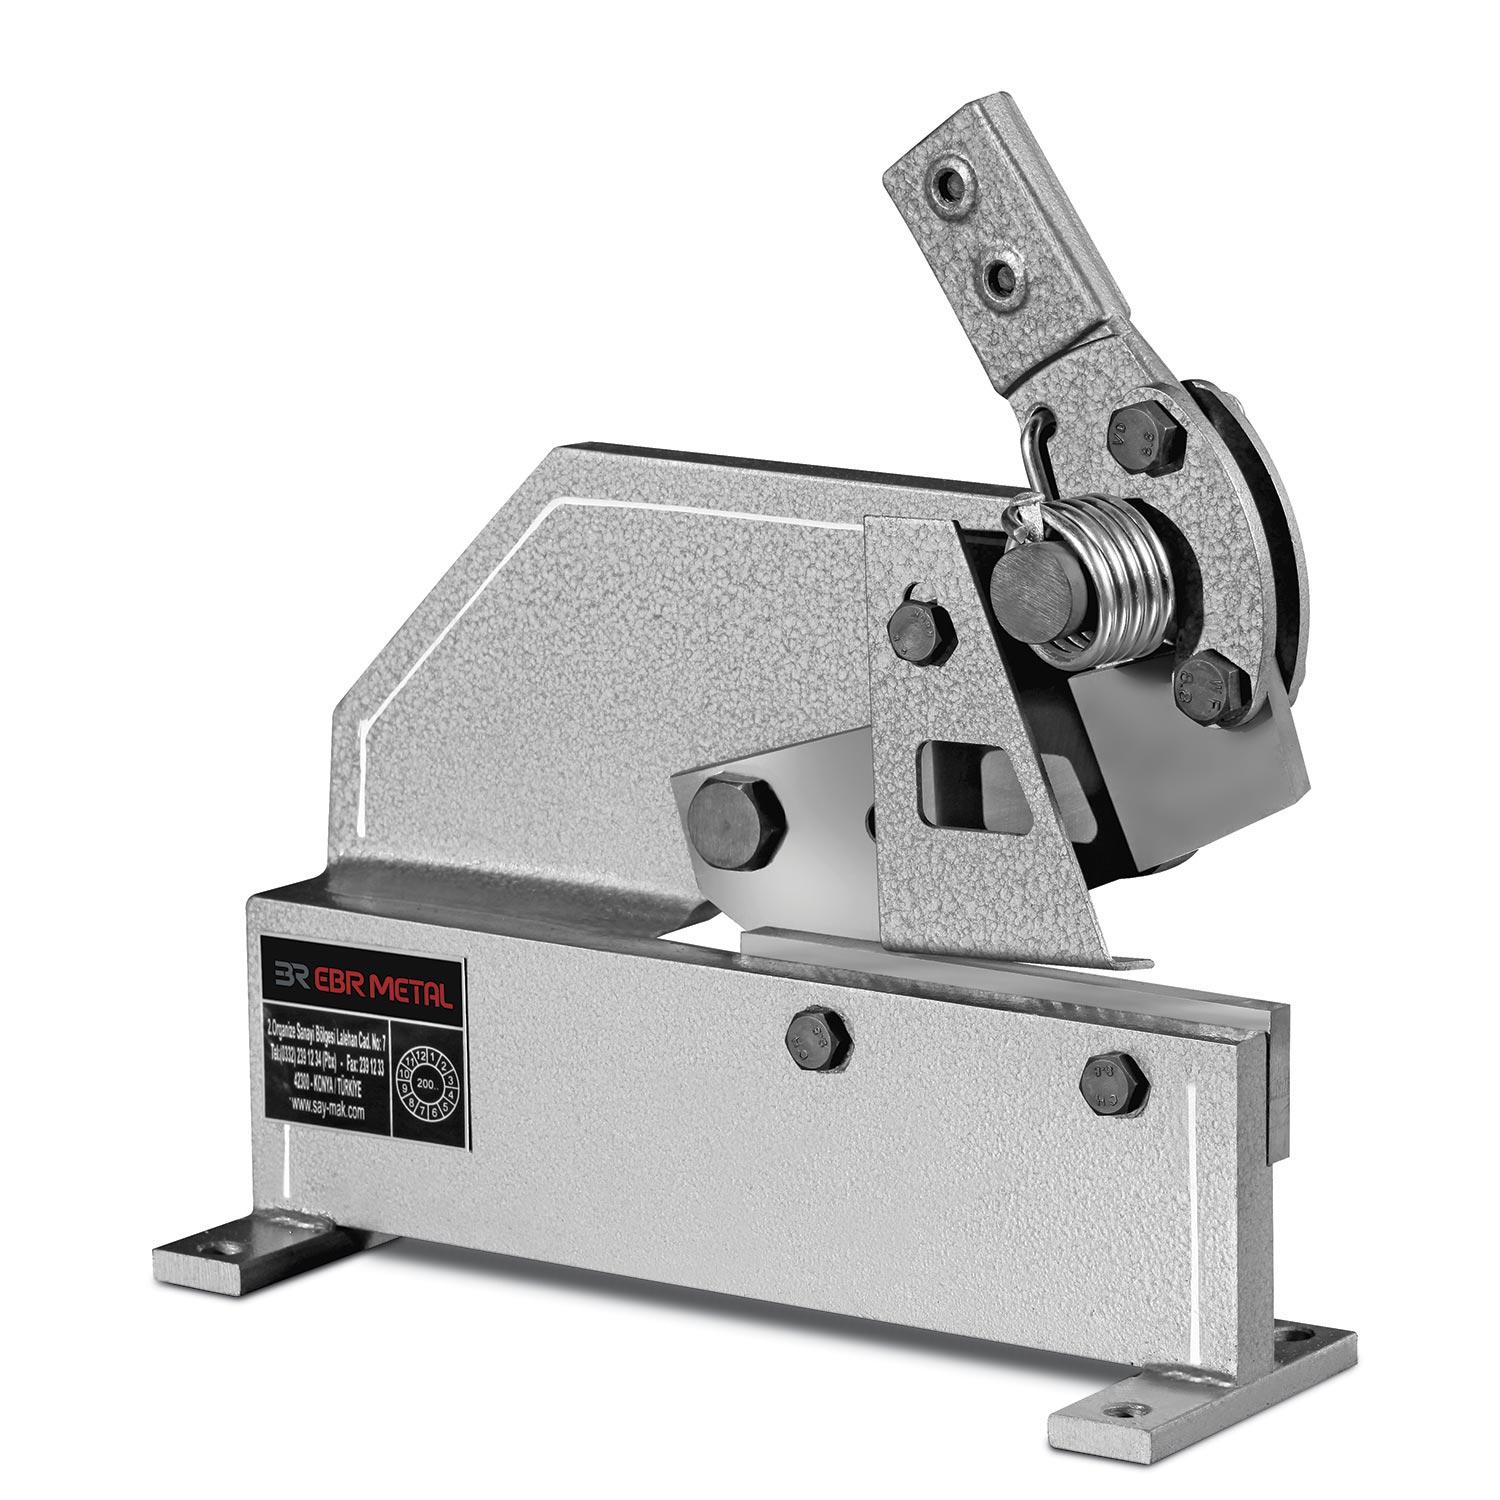 Multifunctional Cutters and Manual Punches - EBR Metal